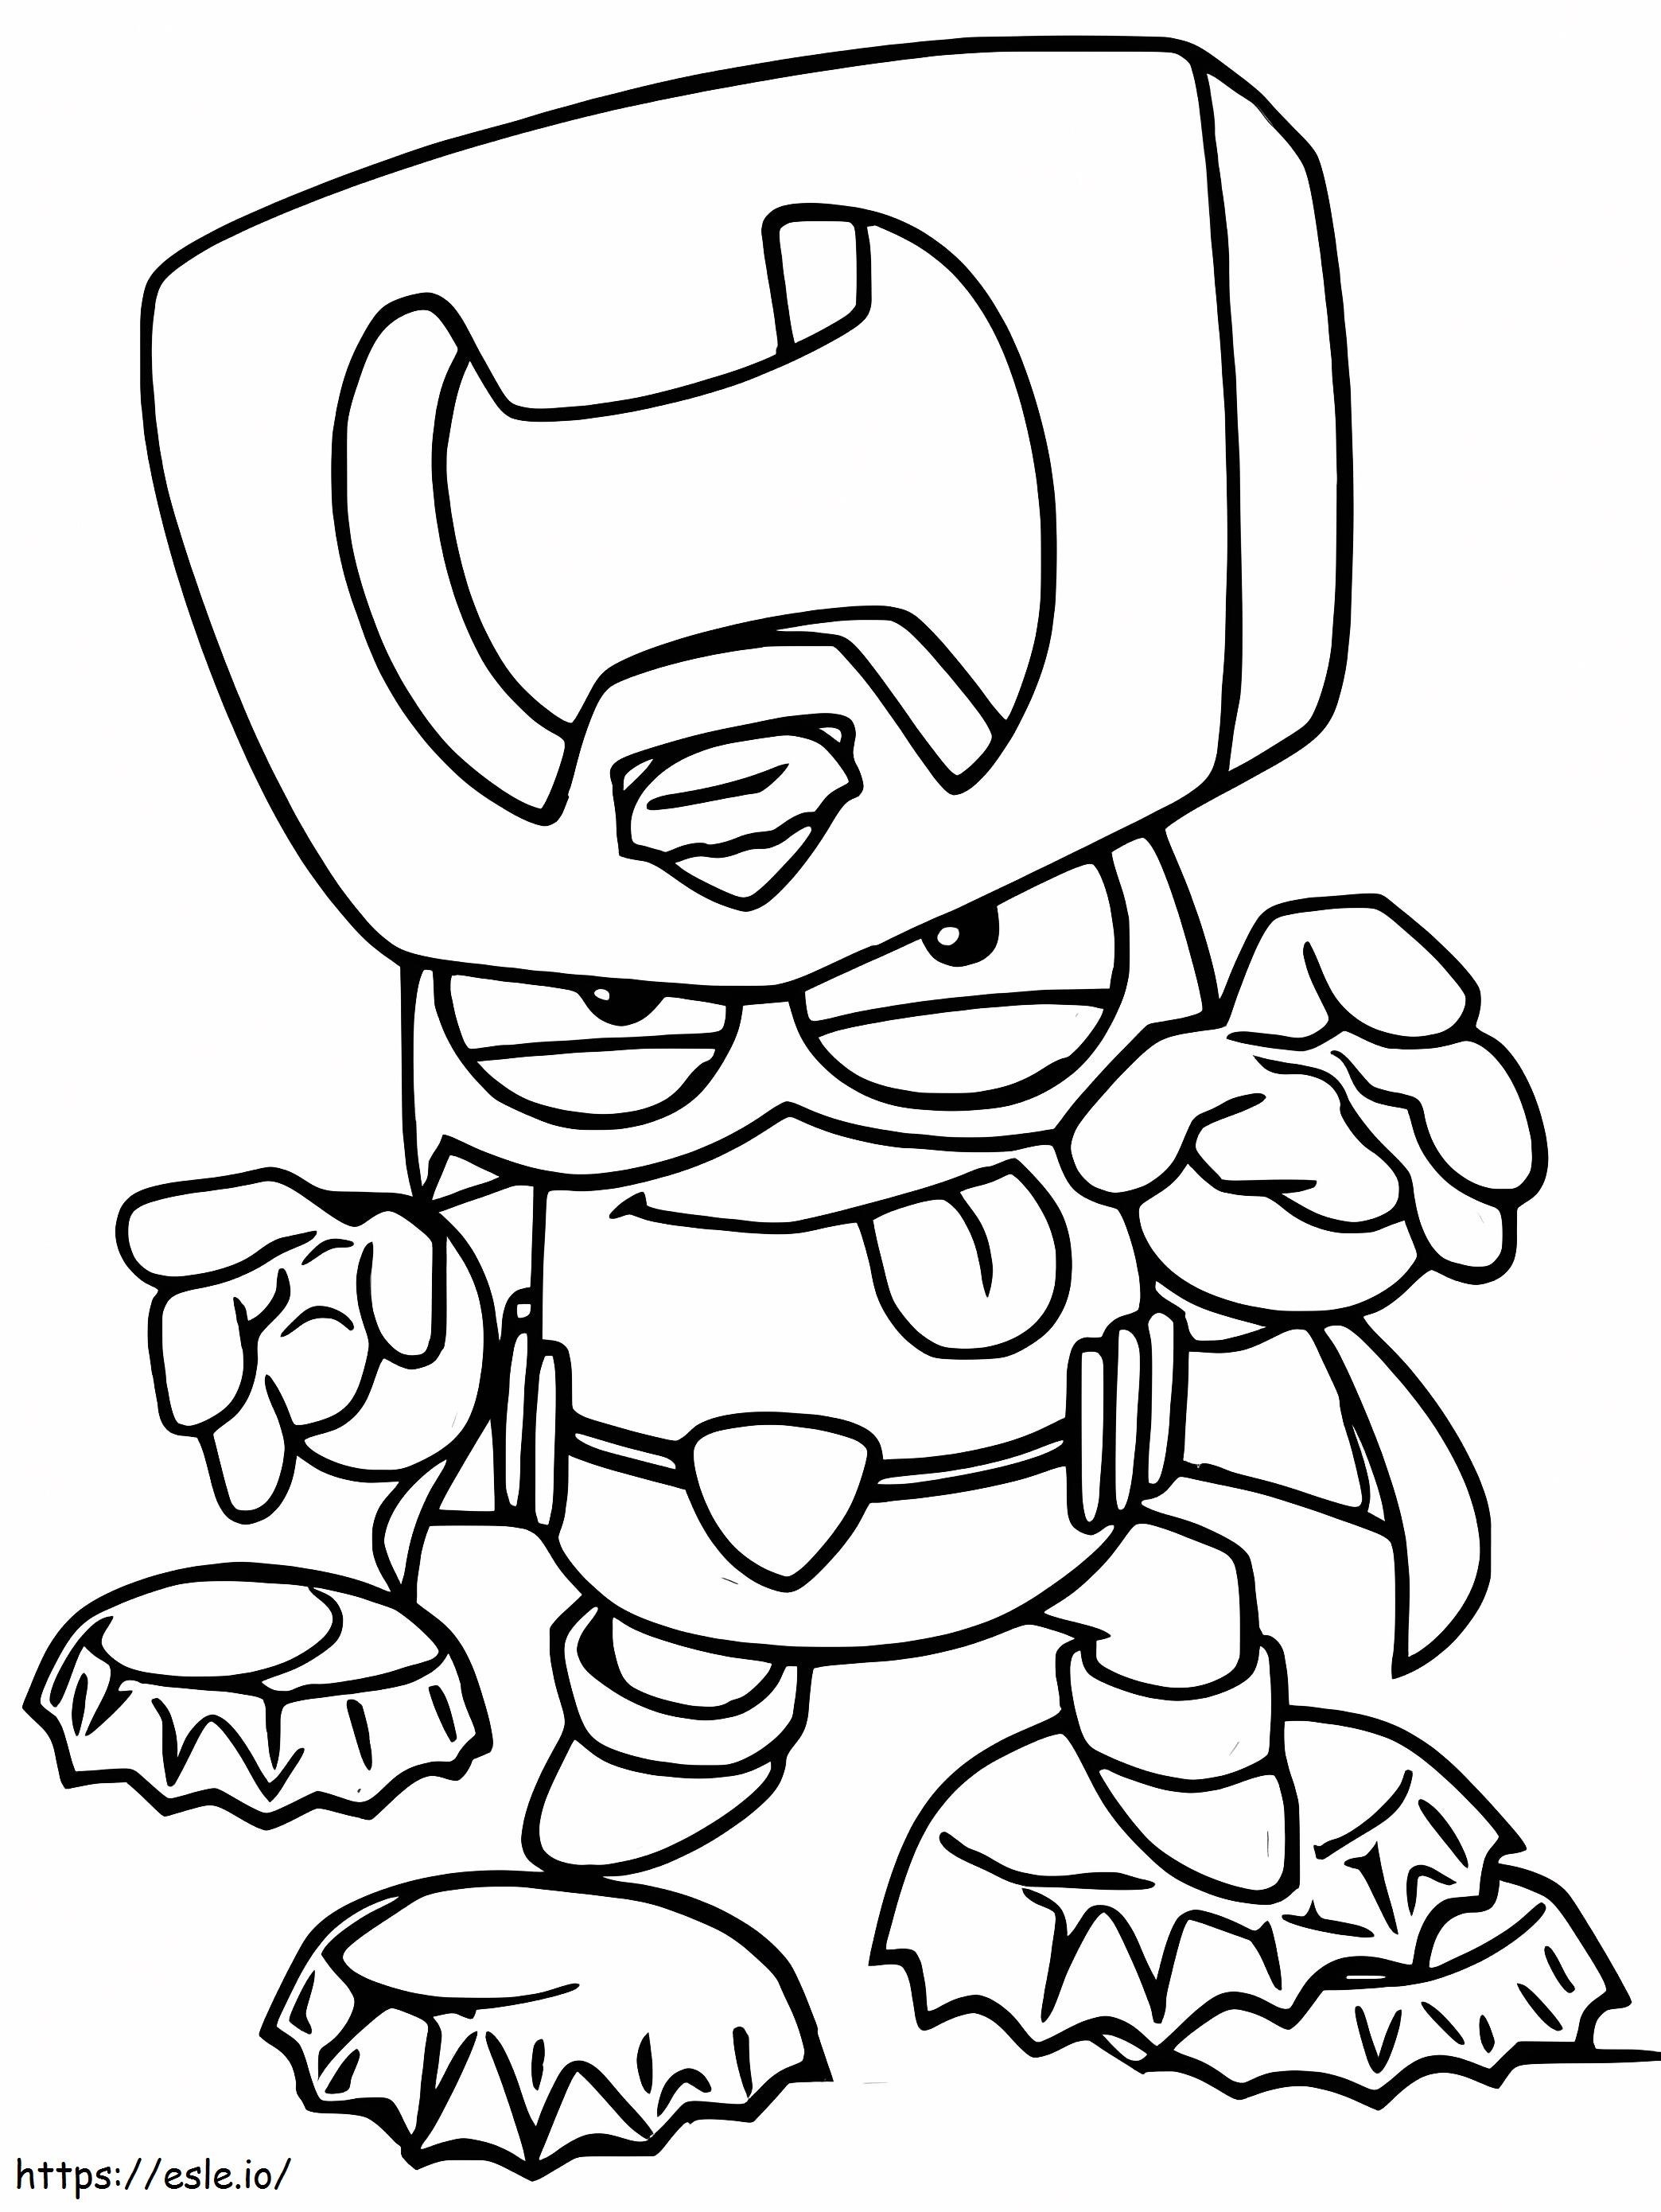 Mad Pop Superzings coloring page